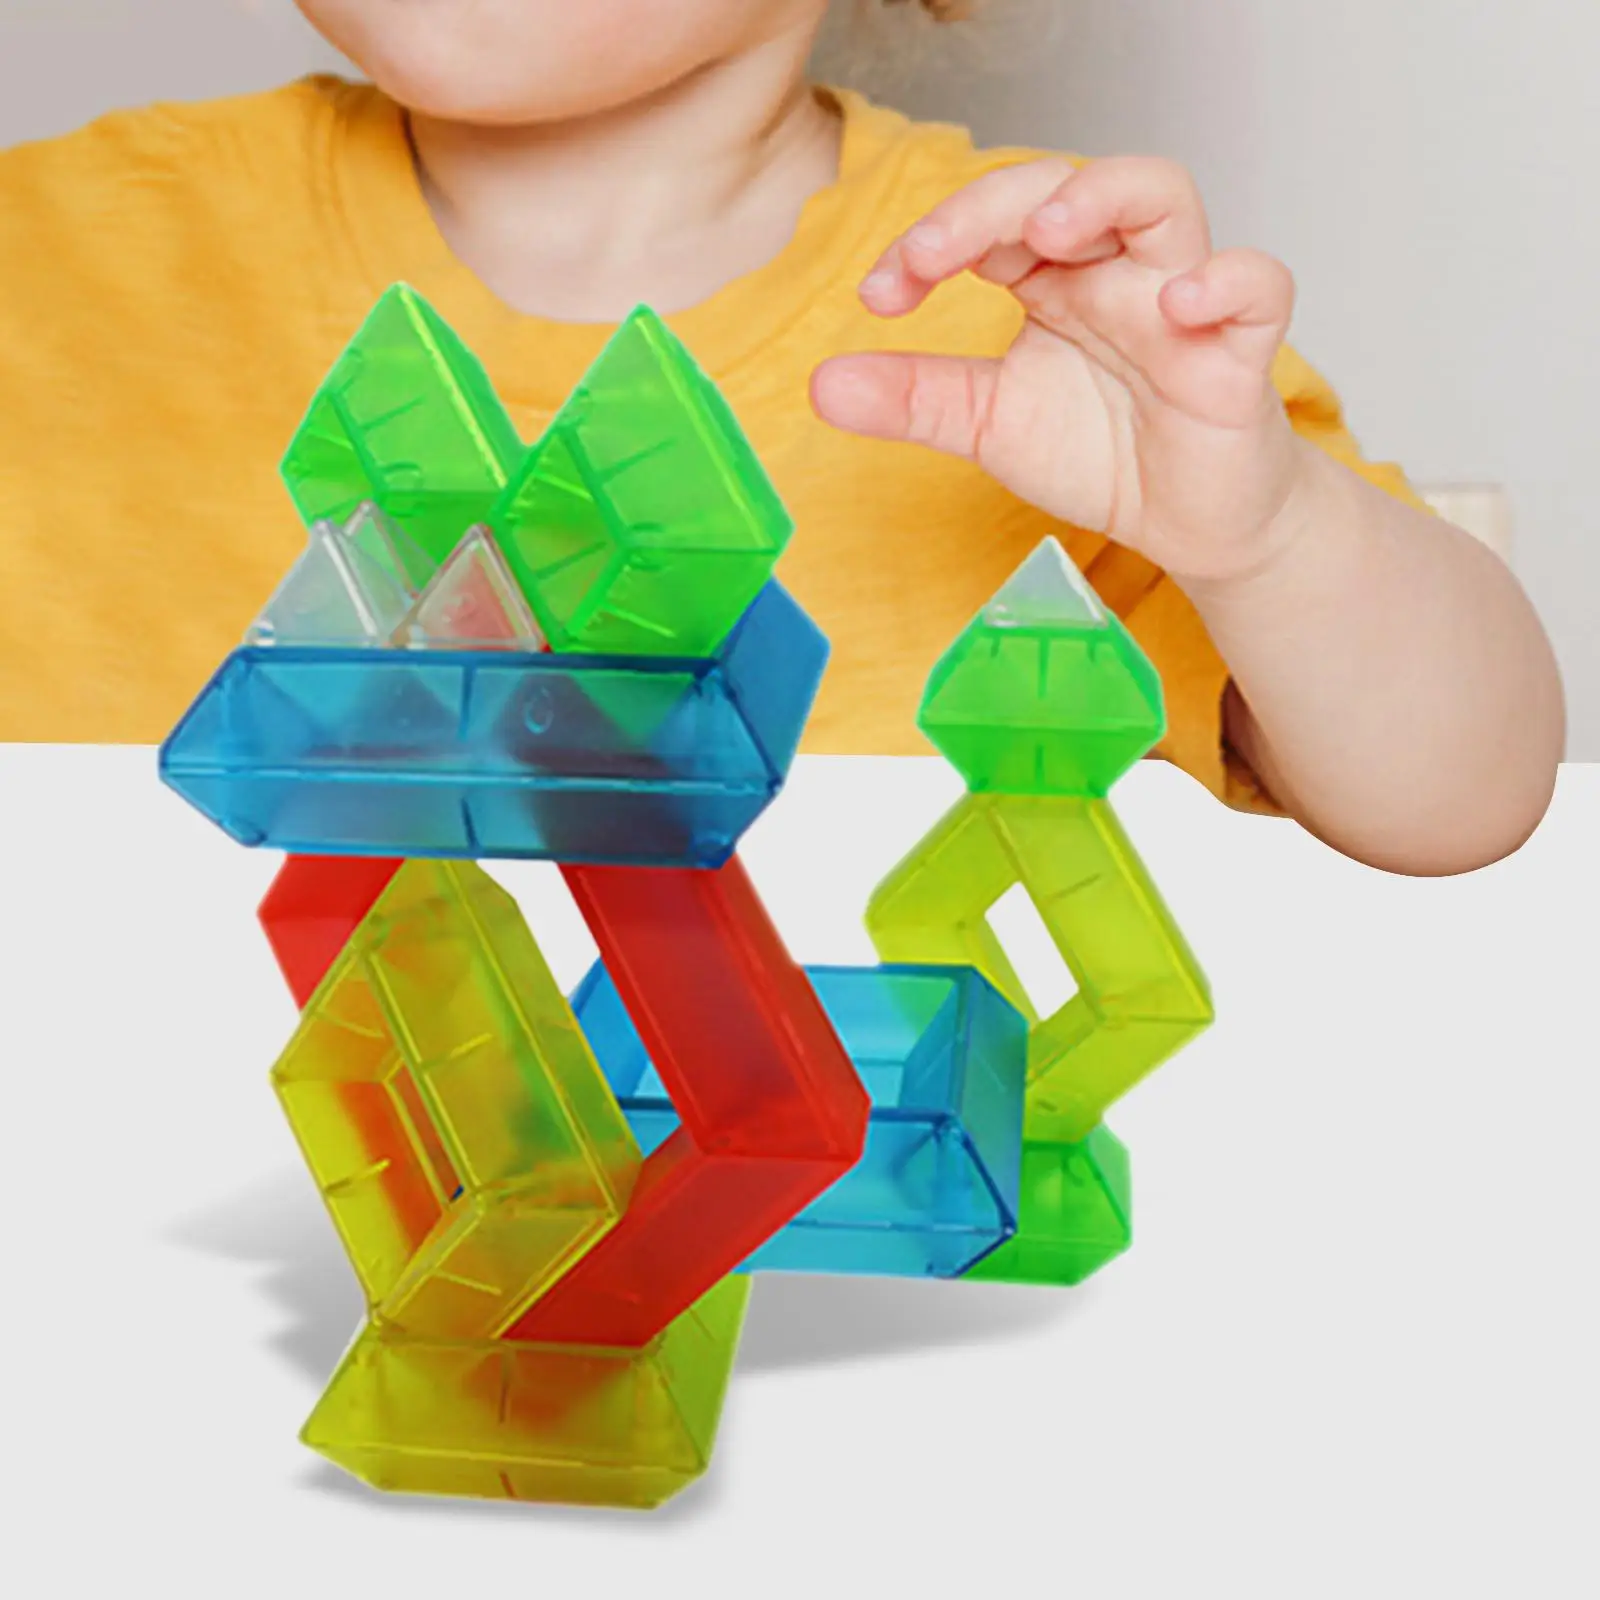 Toys Stacking Building Puzzles Creative Ability Wisdom Pyramids for Toddler